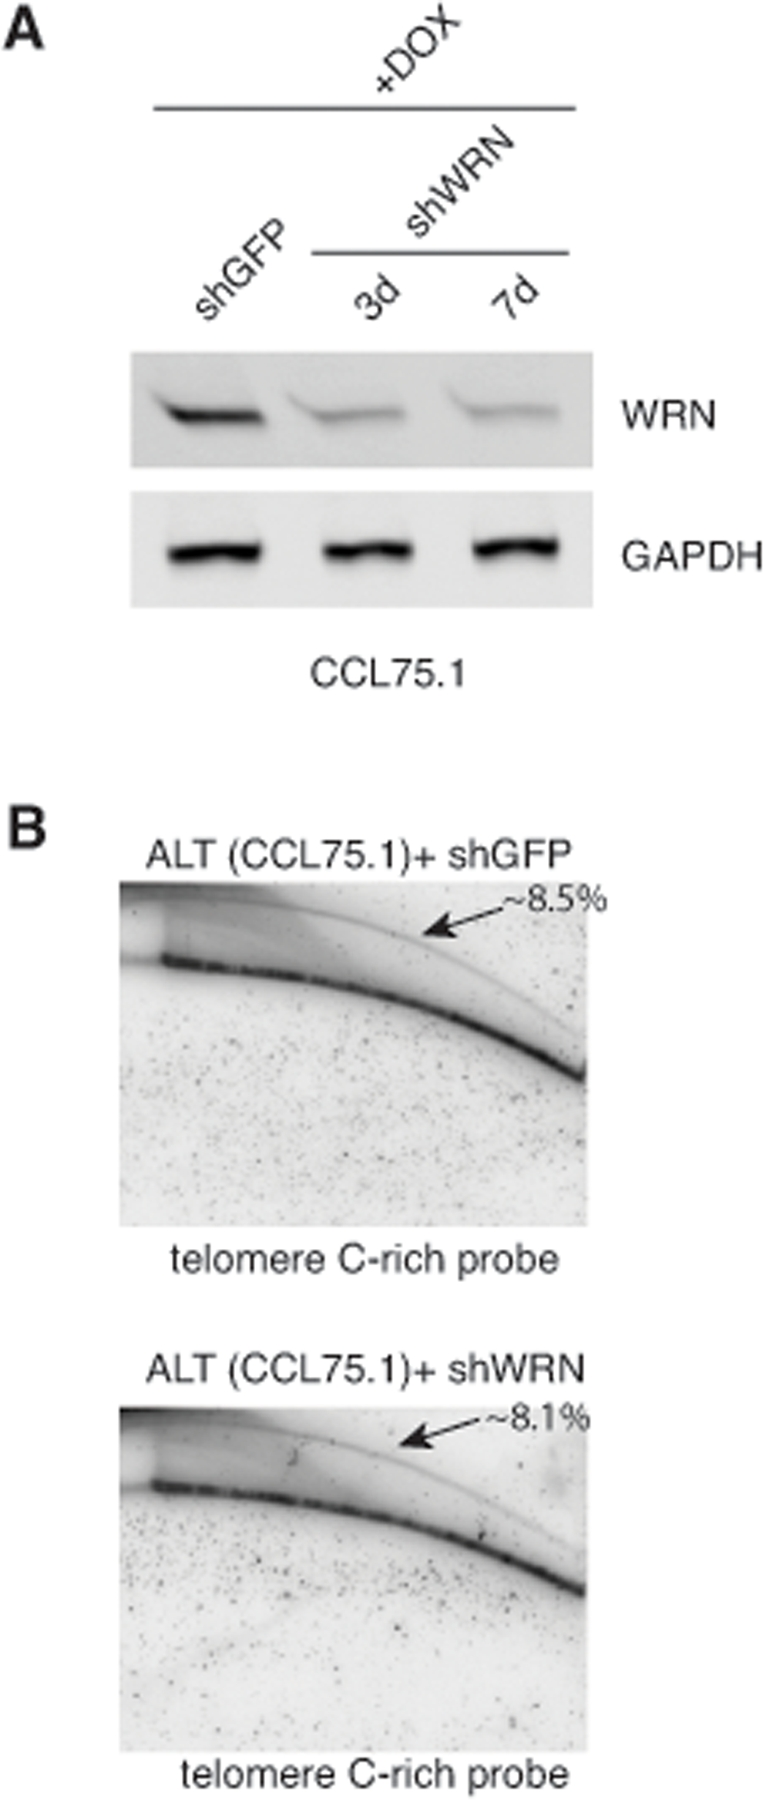 Depletion of WRN does not influence the levels of t-circles in CCL75.1 cells